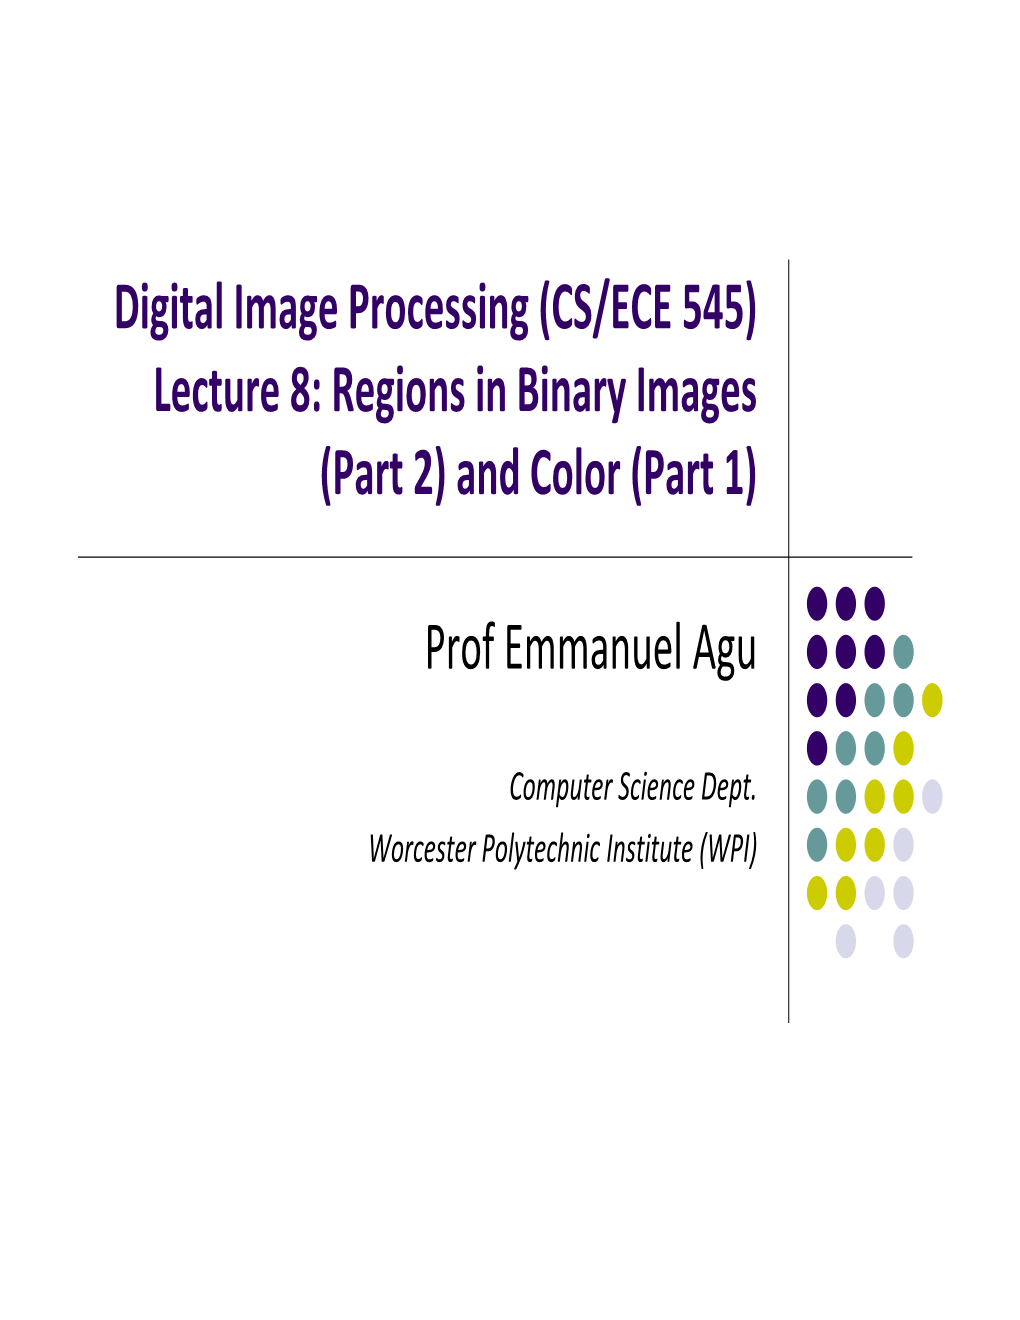 Digital Image Processing (CS/ECE 545) Lecture 8: Regions in Binary Images (Part 2) and Color (Part 1)